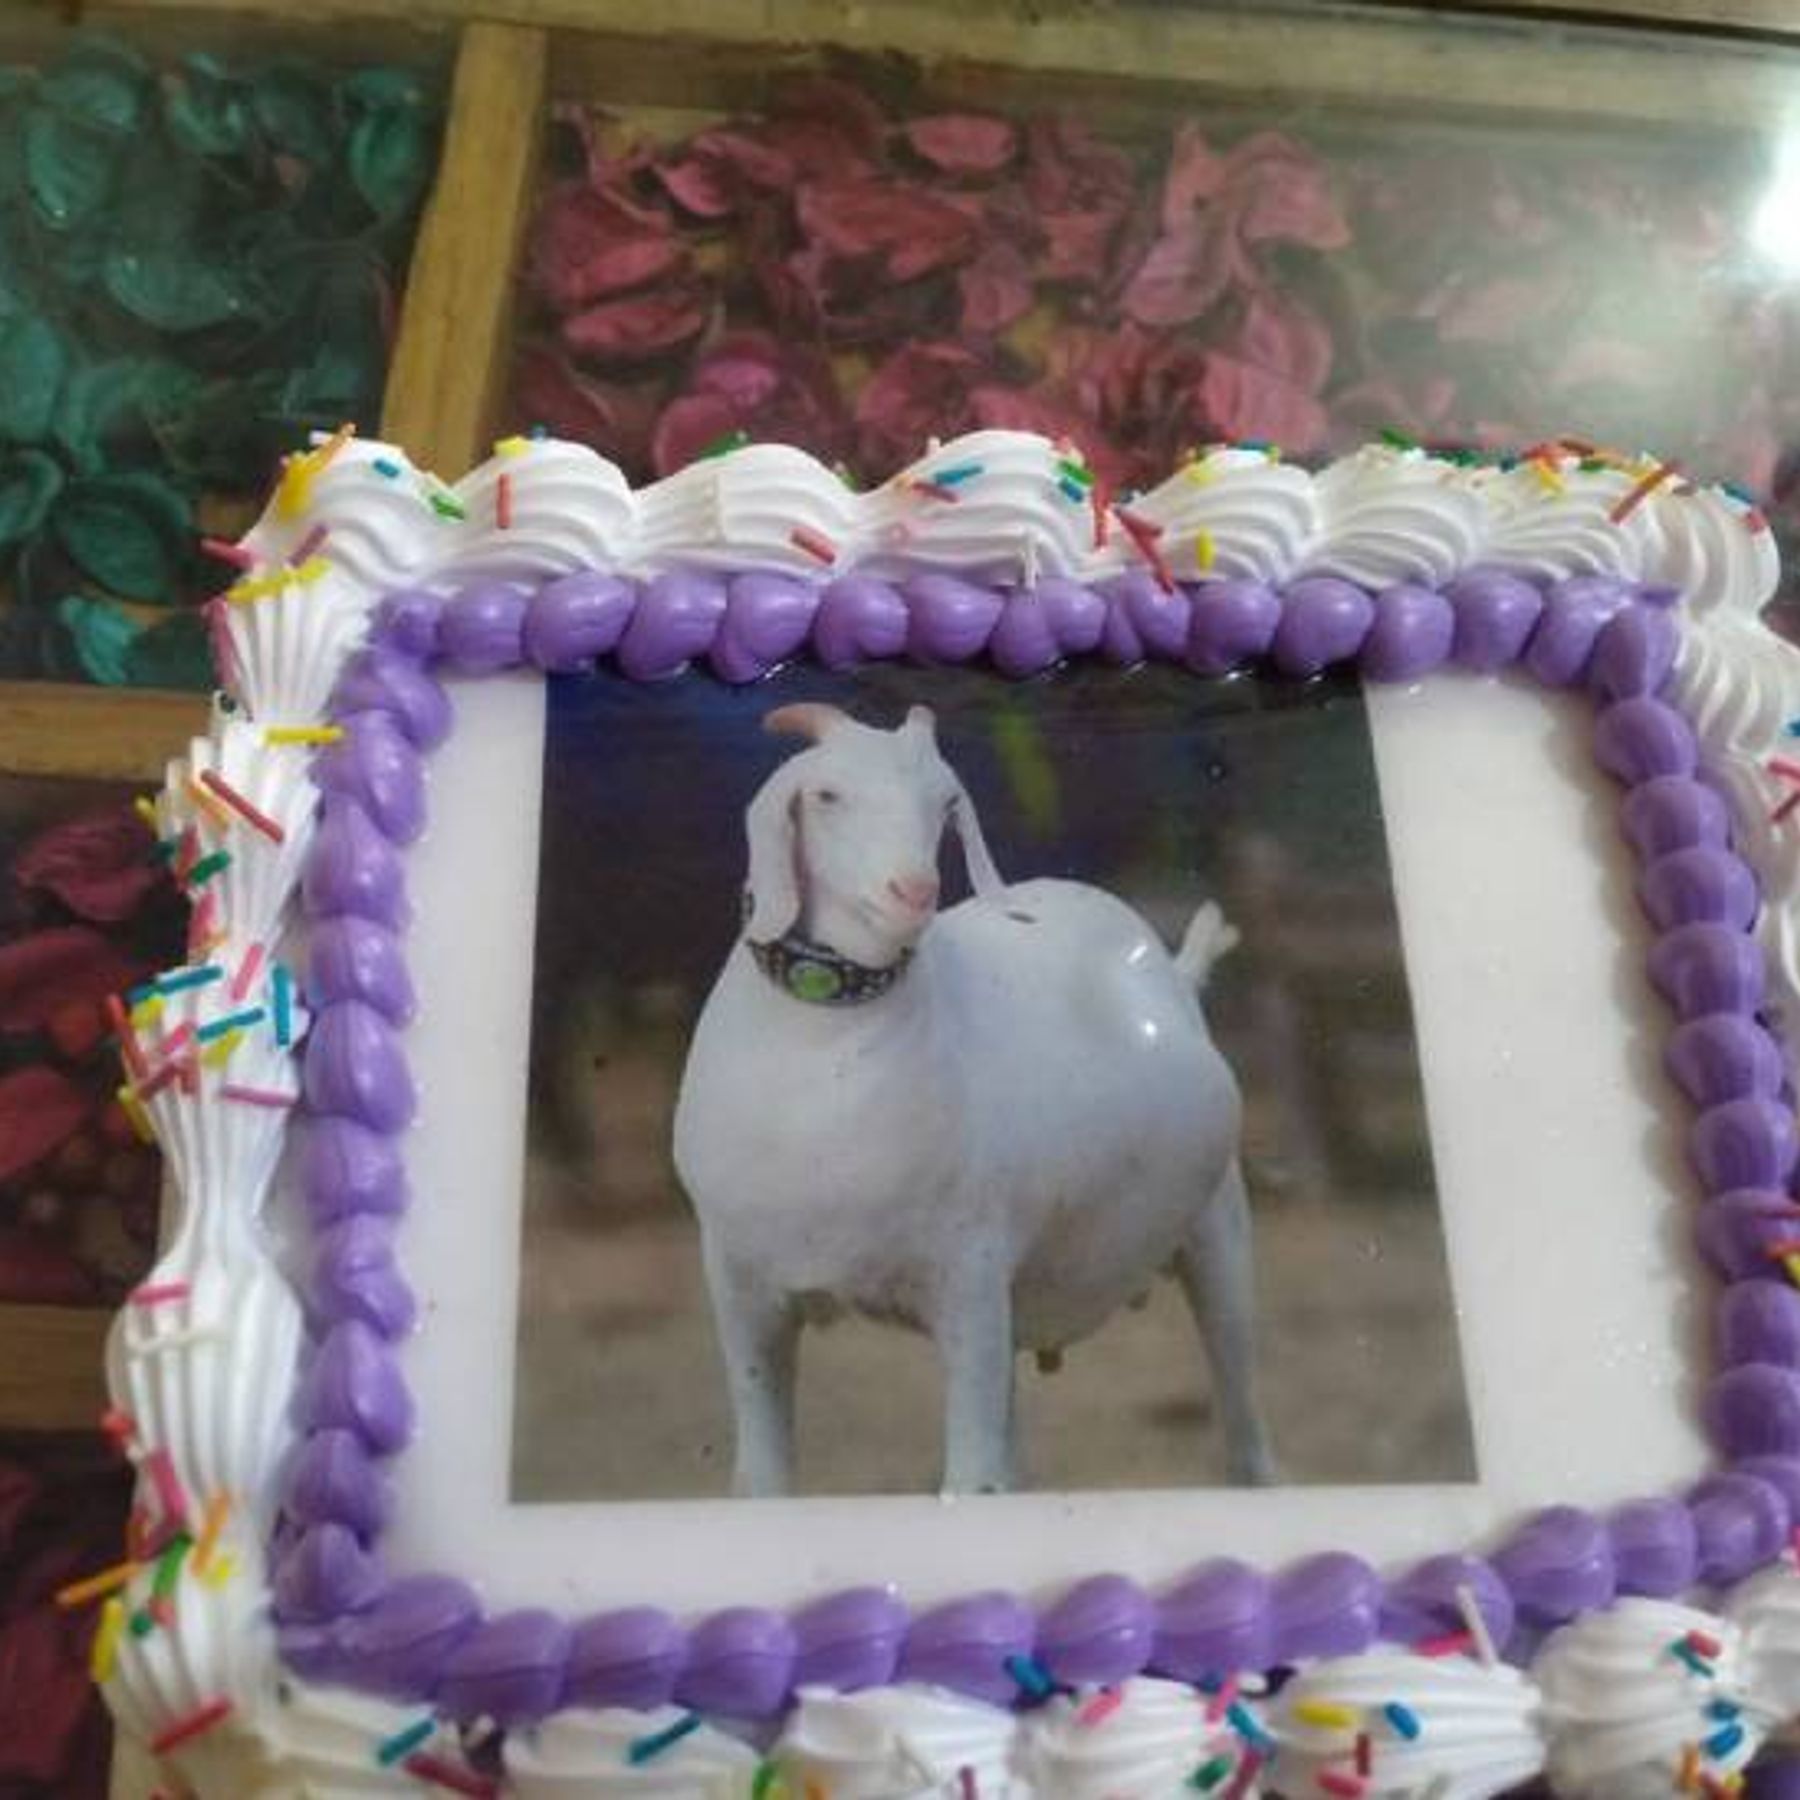 Eid UL-Adha 2018: On Bakra-Eid, Lucknow People To Cut Cakes, Not Goats